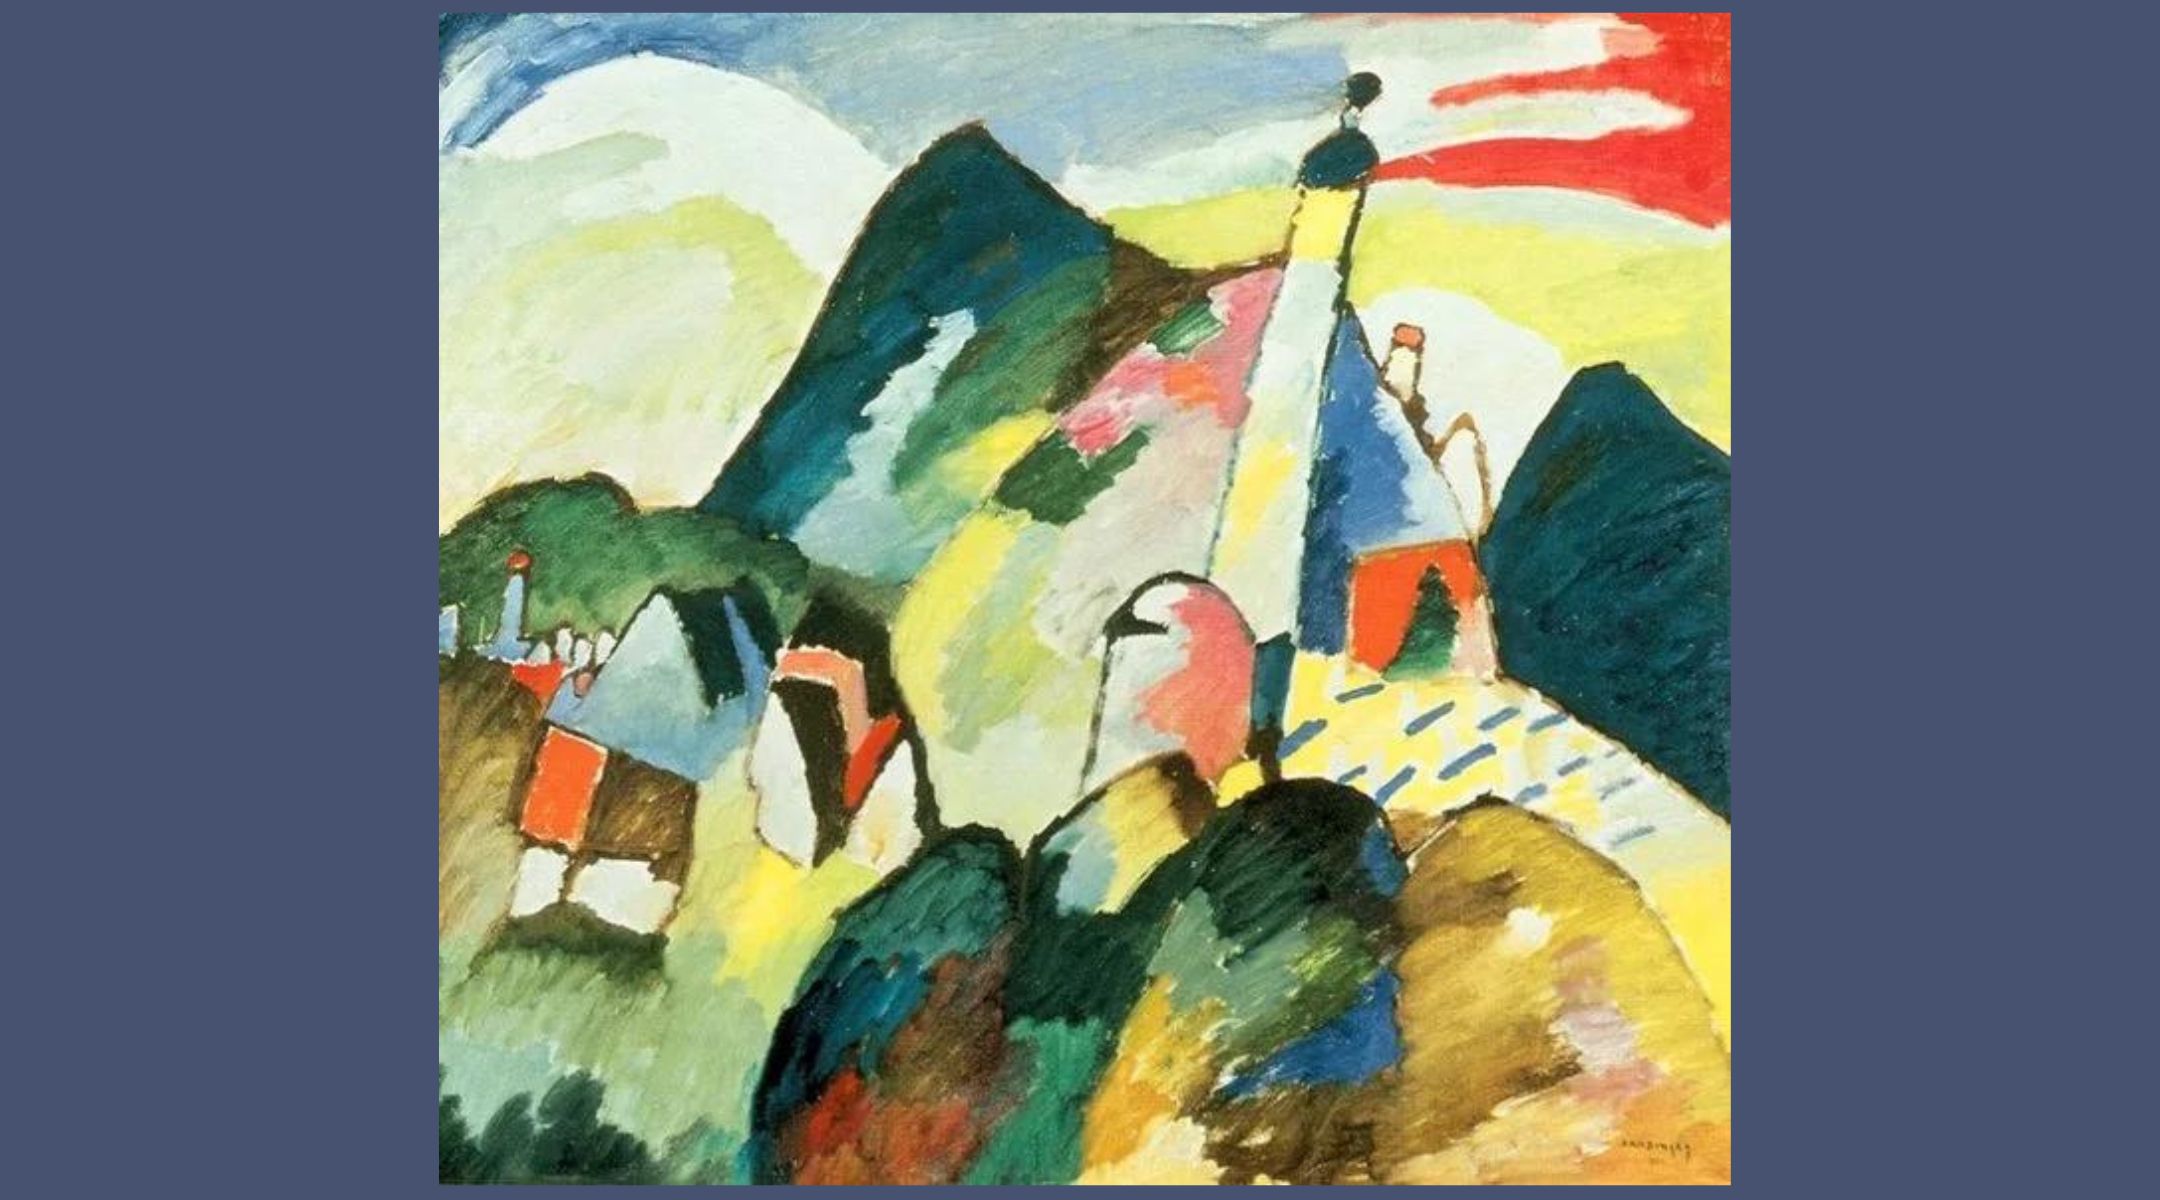 In September 2022, the Wassily Kandinsky painting “View of Murnau with Church” was returned to the descendants of a Jewish art collector who was murdered in the Holocaust. (Public domain)